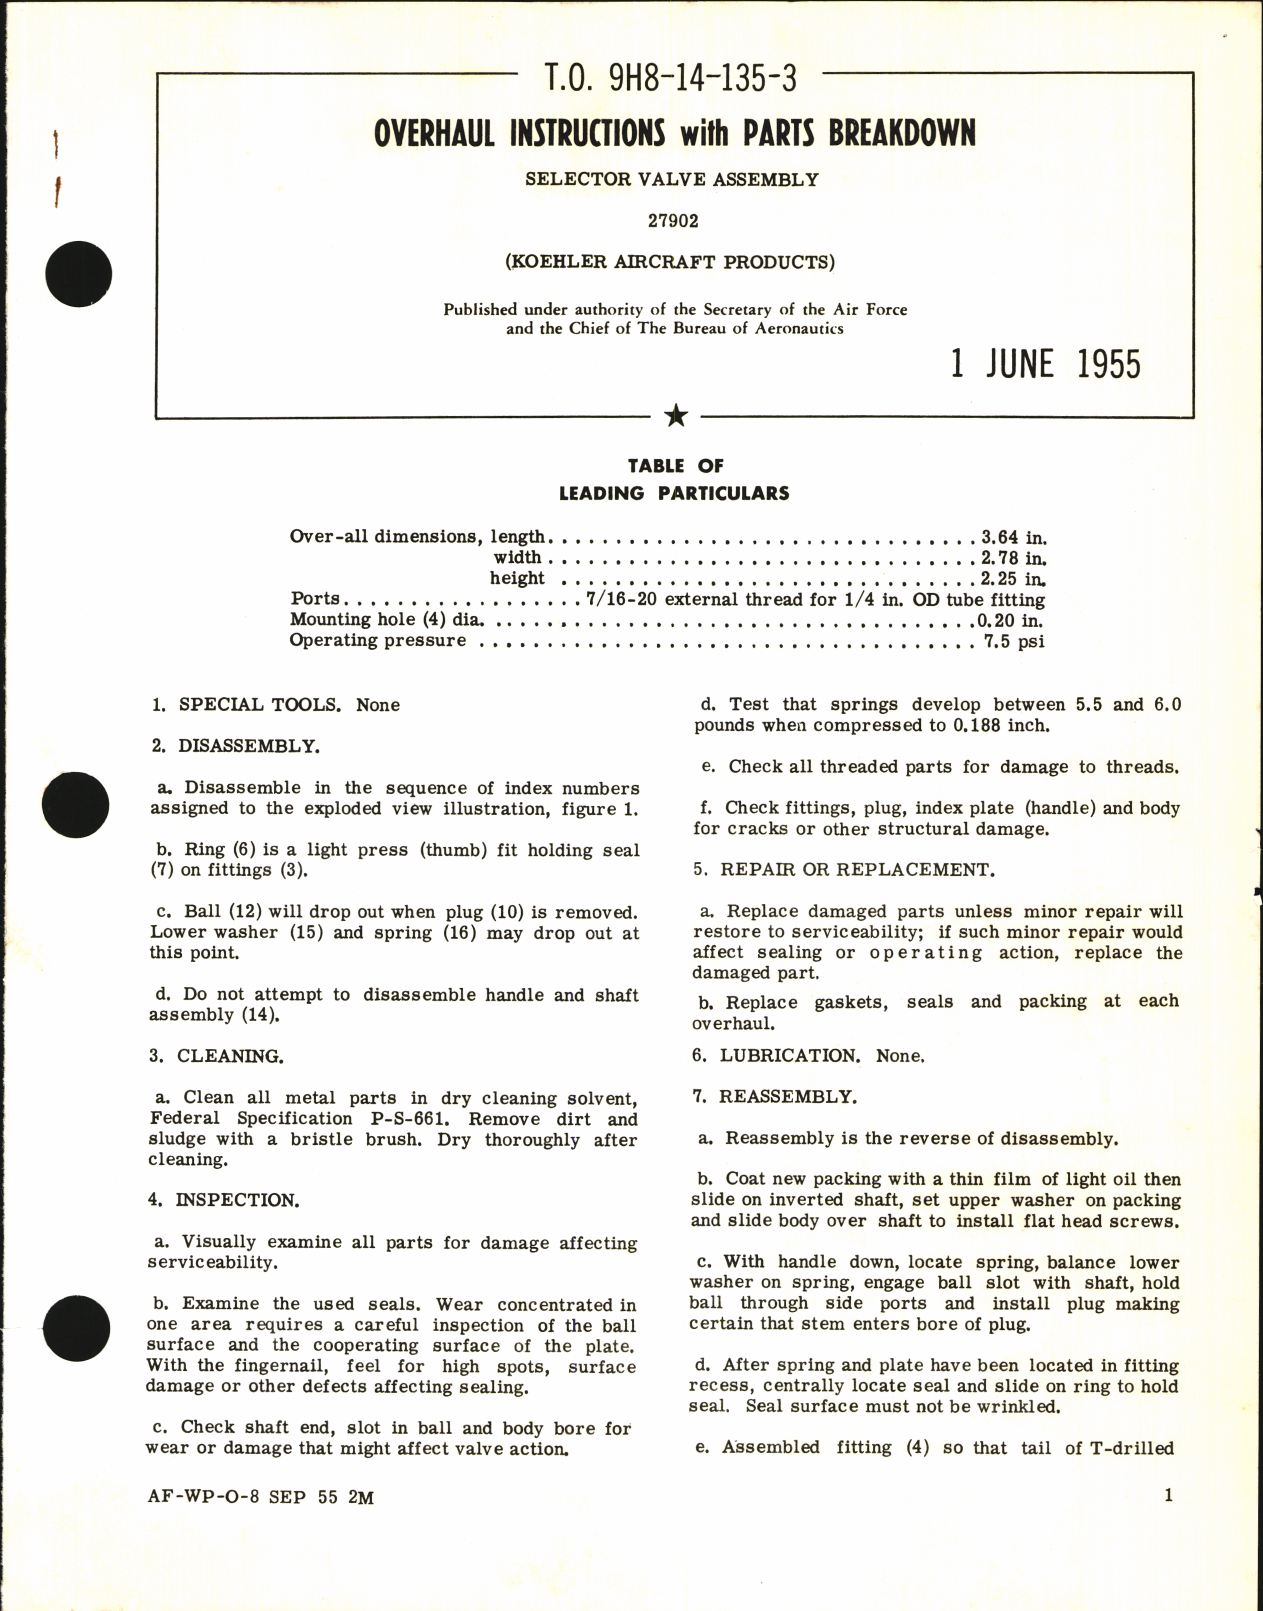 Sample page 1 from AirCorps Library document: Overhaul Instructions with Parts Breakdown for Selector Valve Assembly 27902